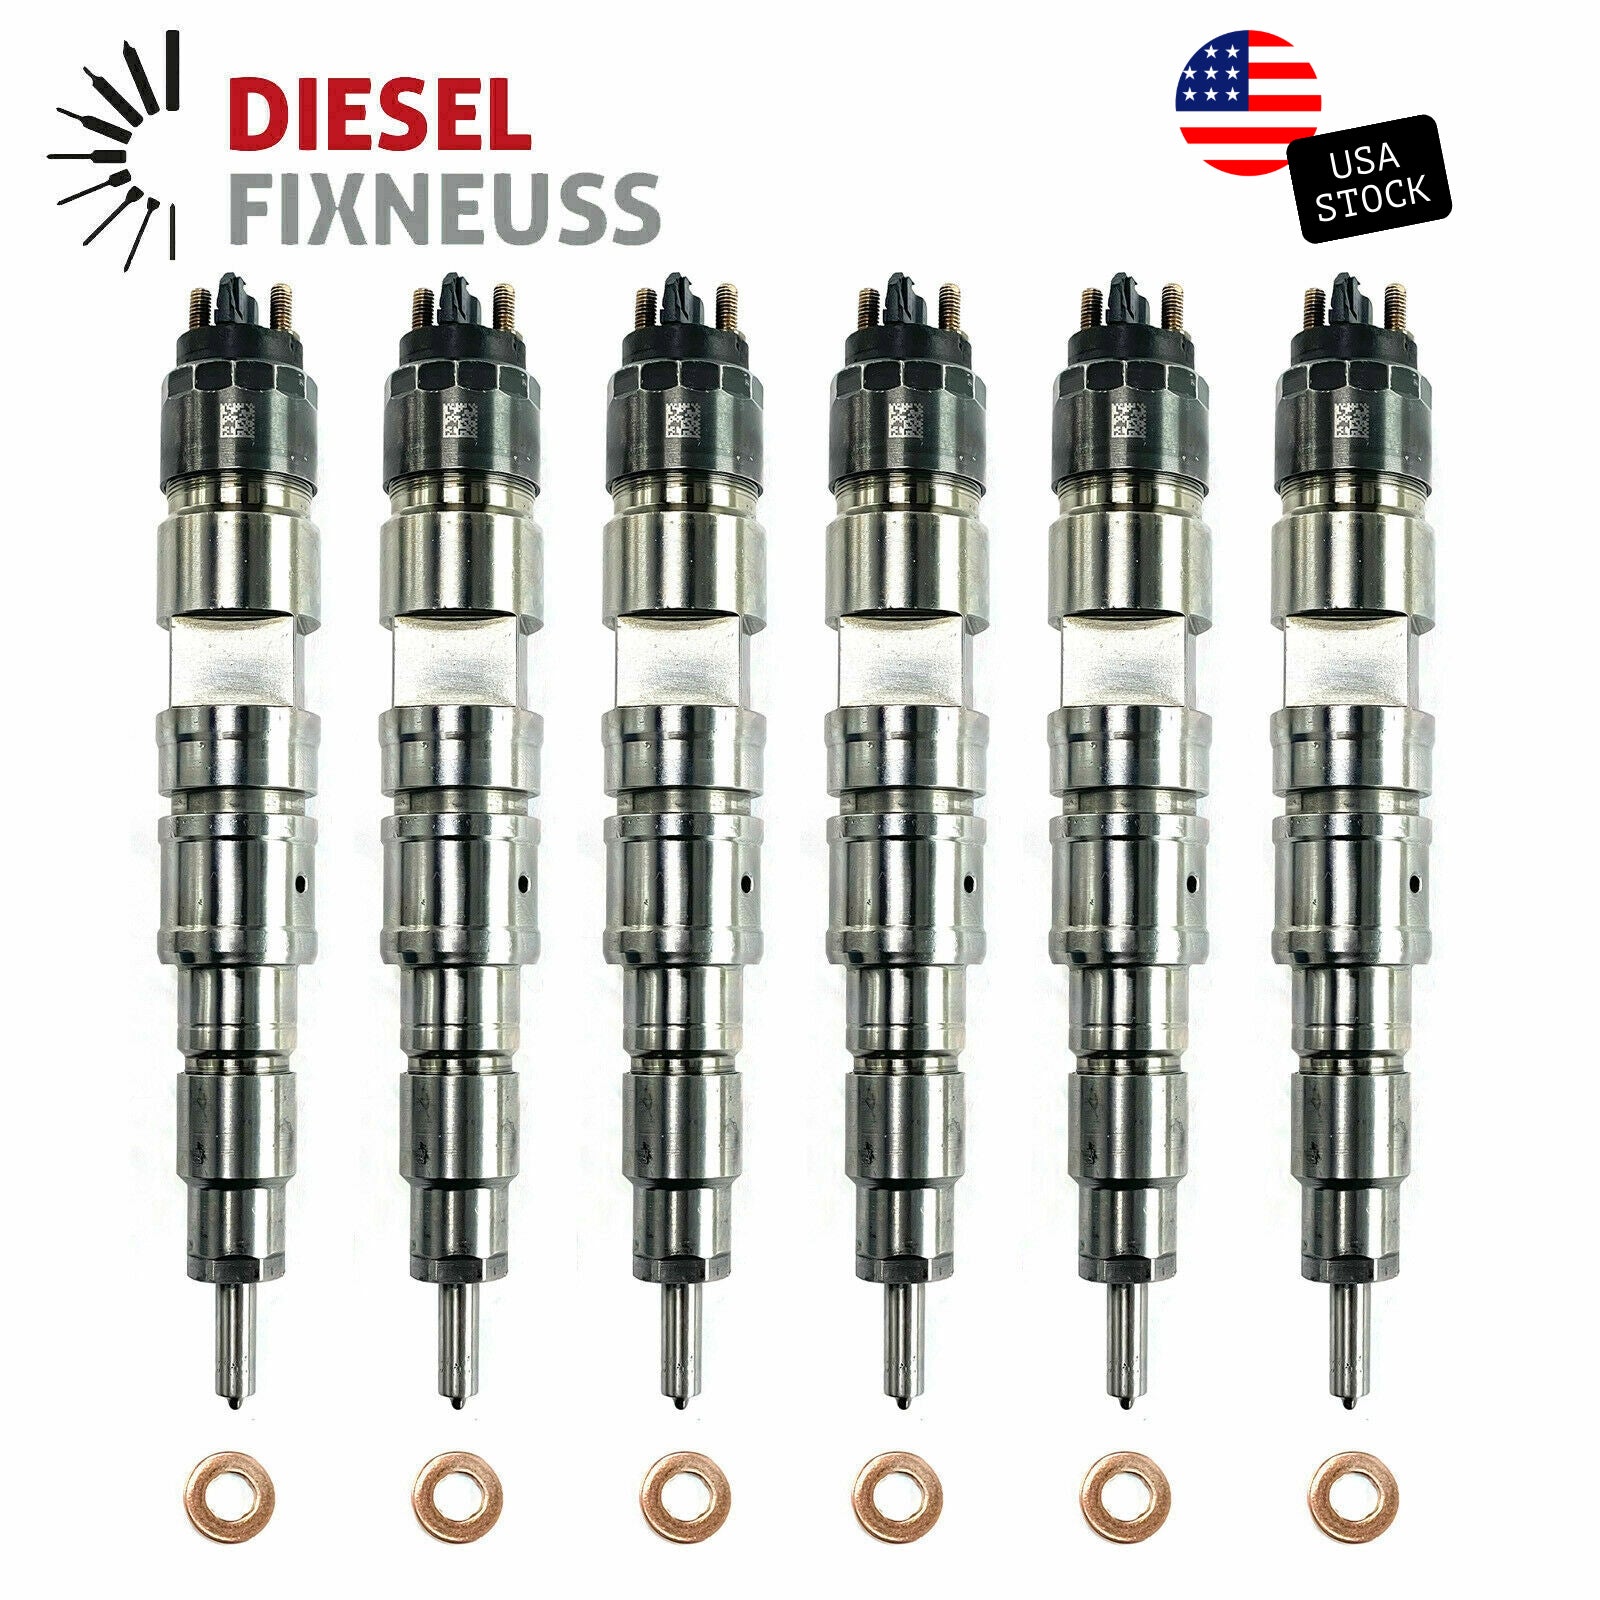 6x 0445120064 21006085 Fuel Injector For VOLVO Bus B 5 6 7 8 FL FE RENAULT DXI